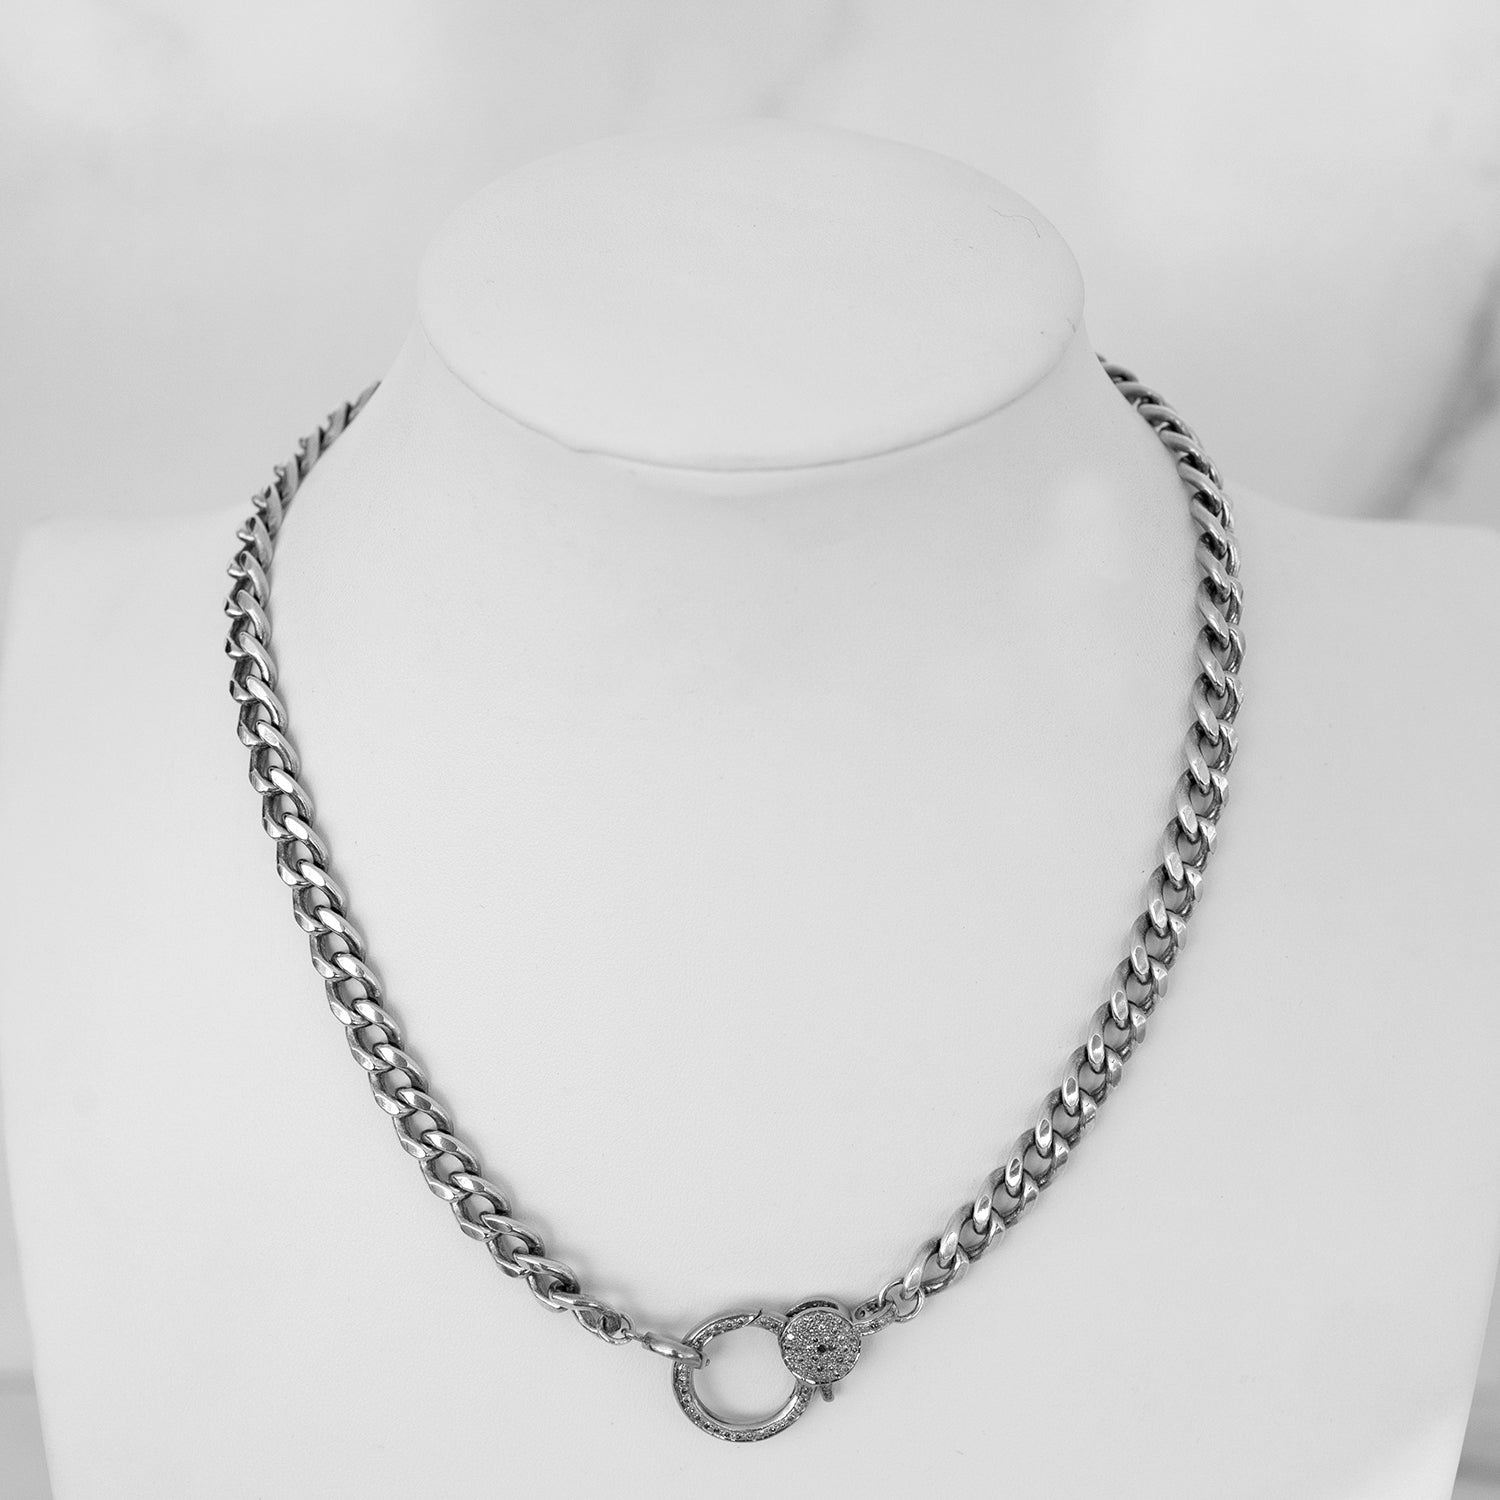 Short Heavy Cable Chain Necklace with Diamond Claw Clasp - 18" NB000064 - TBird